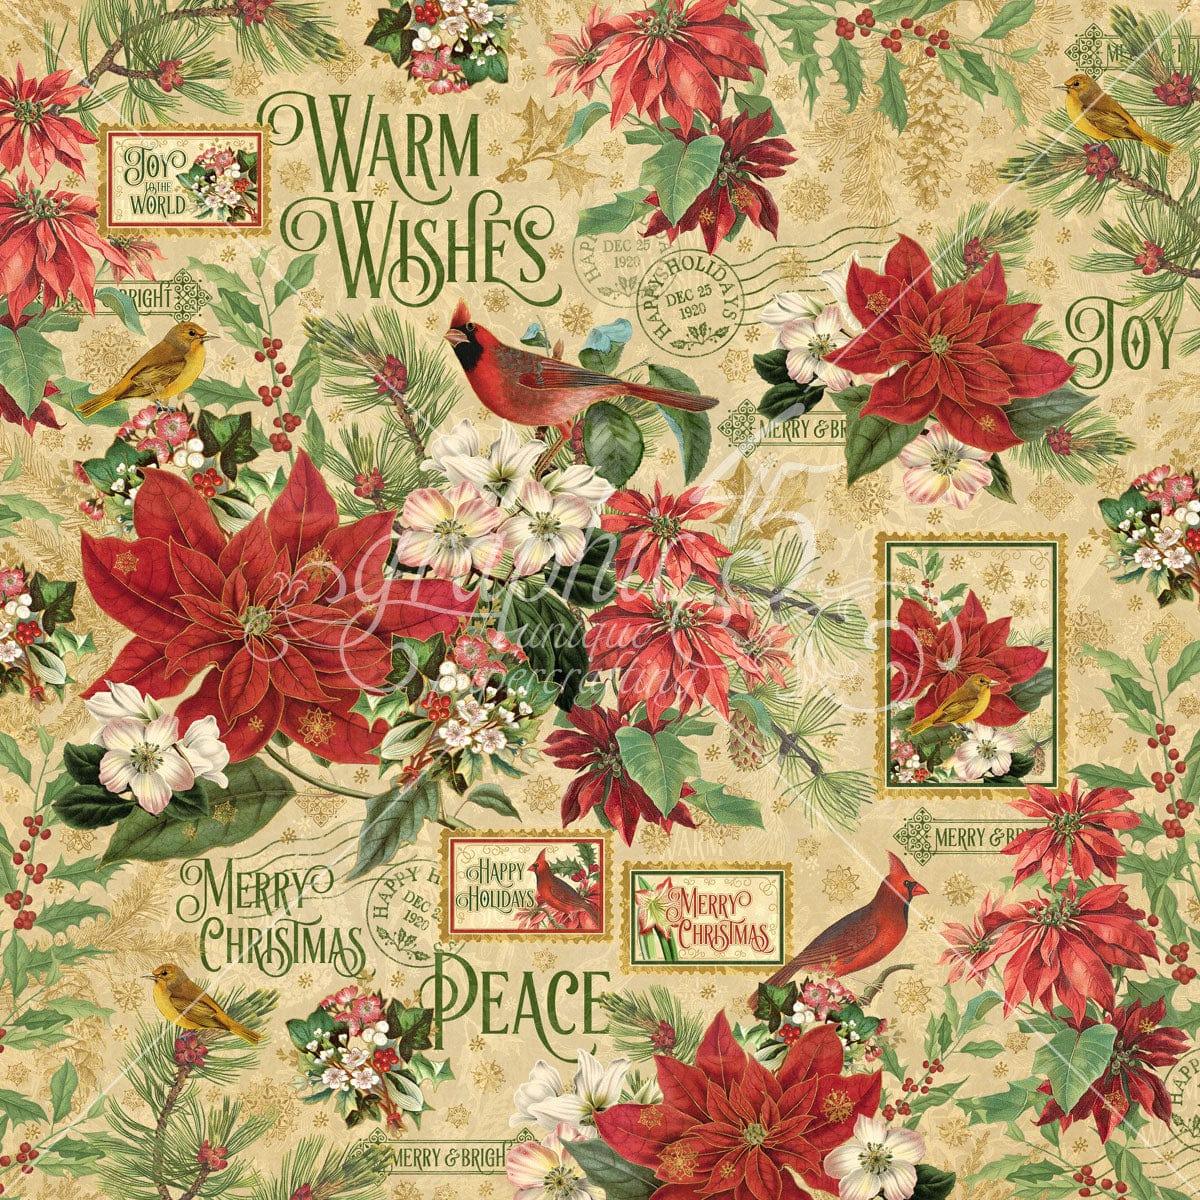 Warm Wishes Collection Peace and Plenty 12 x 12 Double-Sided Scrapbook Paper by Graphic 45 - Scrapbook Supply Companies